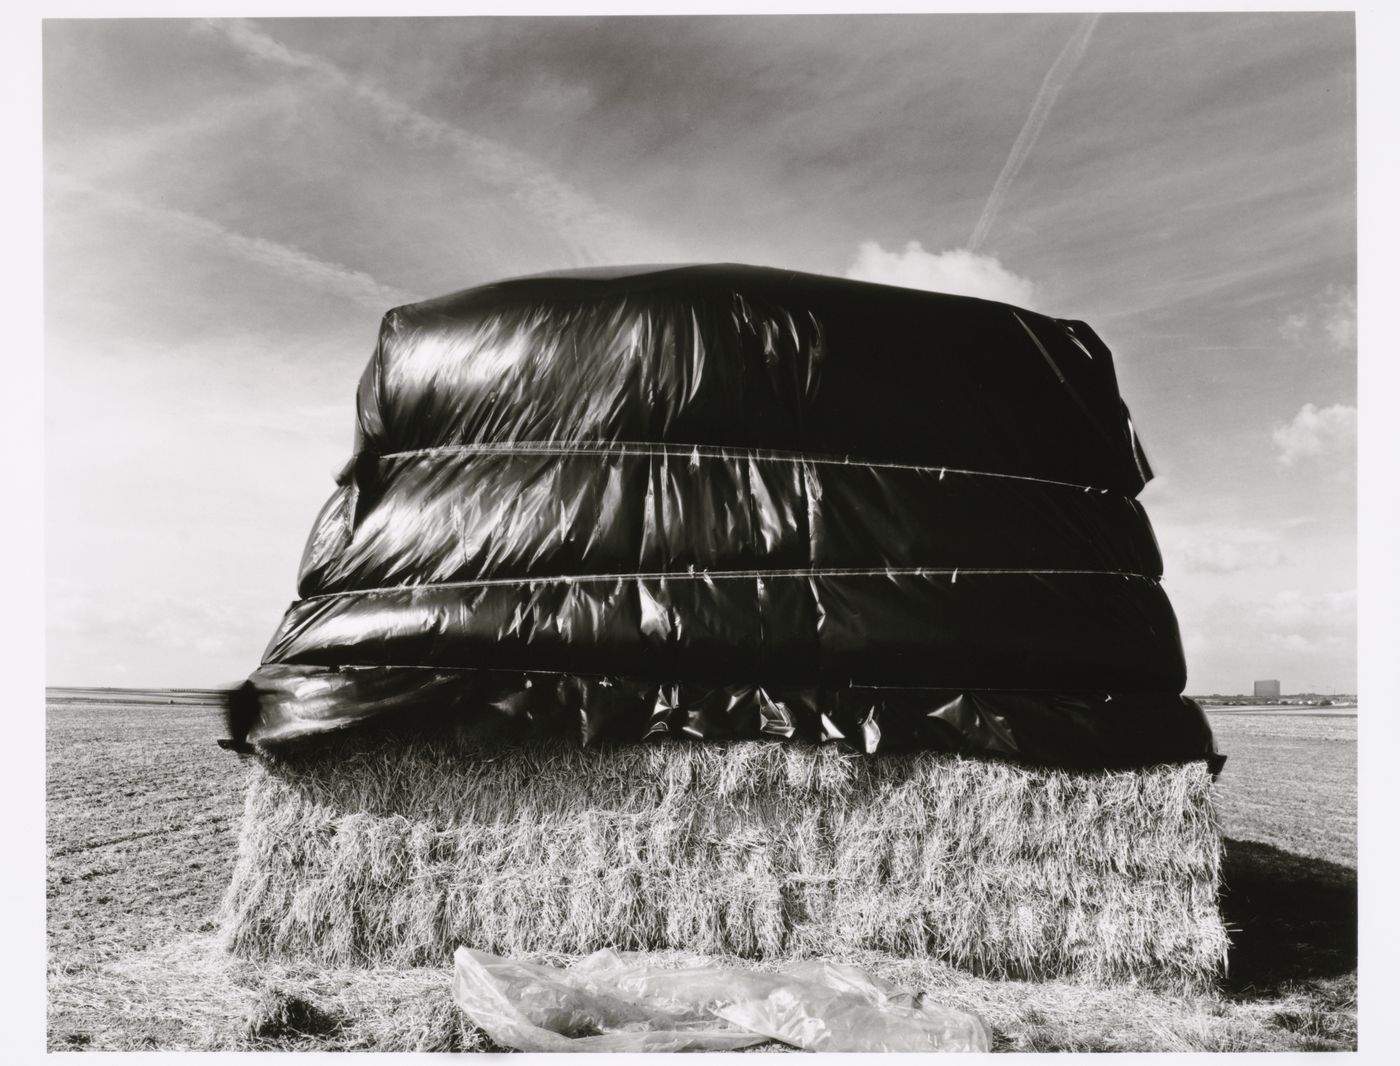 View of stacked bales of straw covered in black plastic, Mainz, Germany